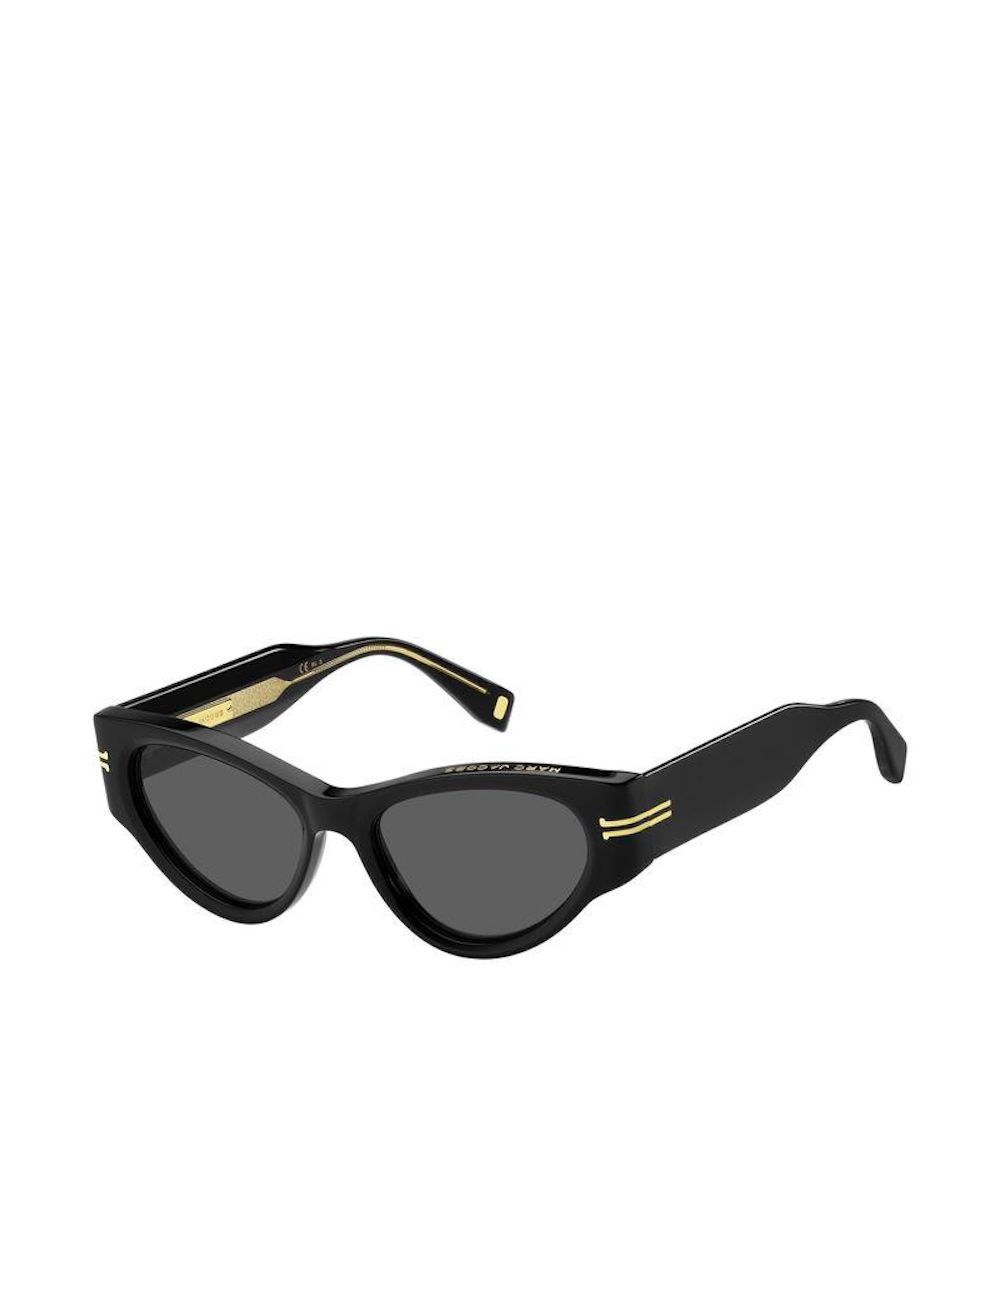 Marc Jacobs 495 S J5G 9O 58 | Buy Online at Bassol Optic